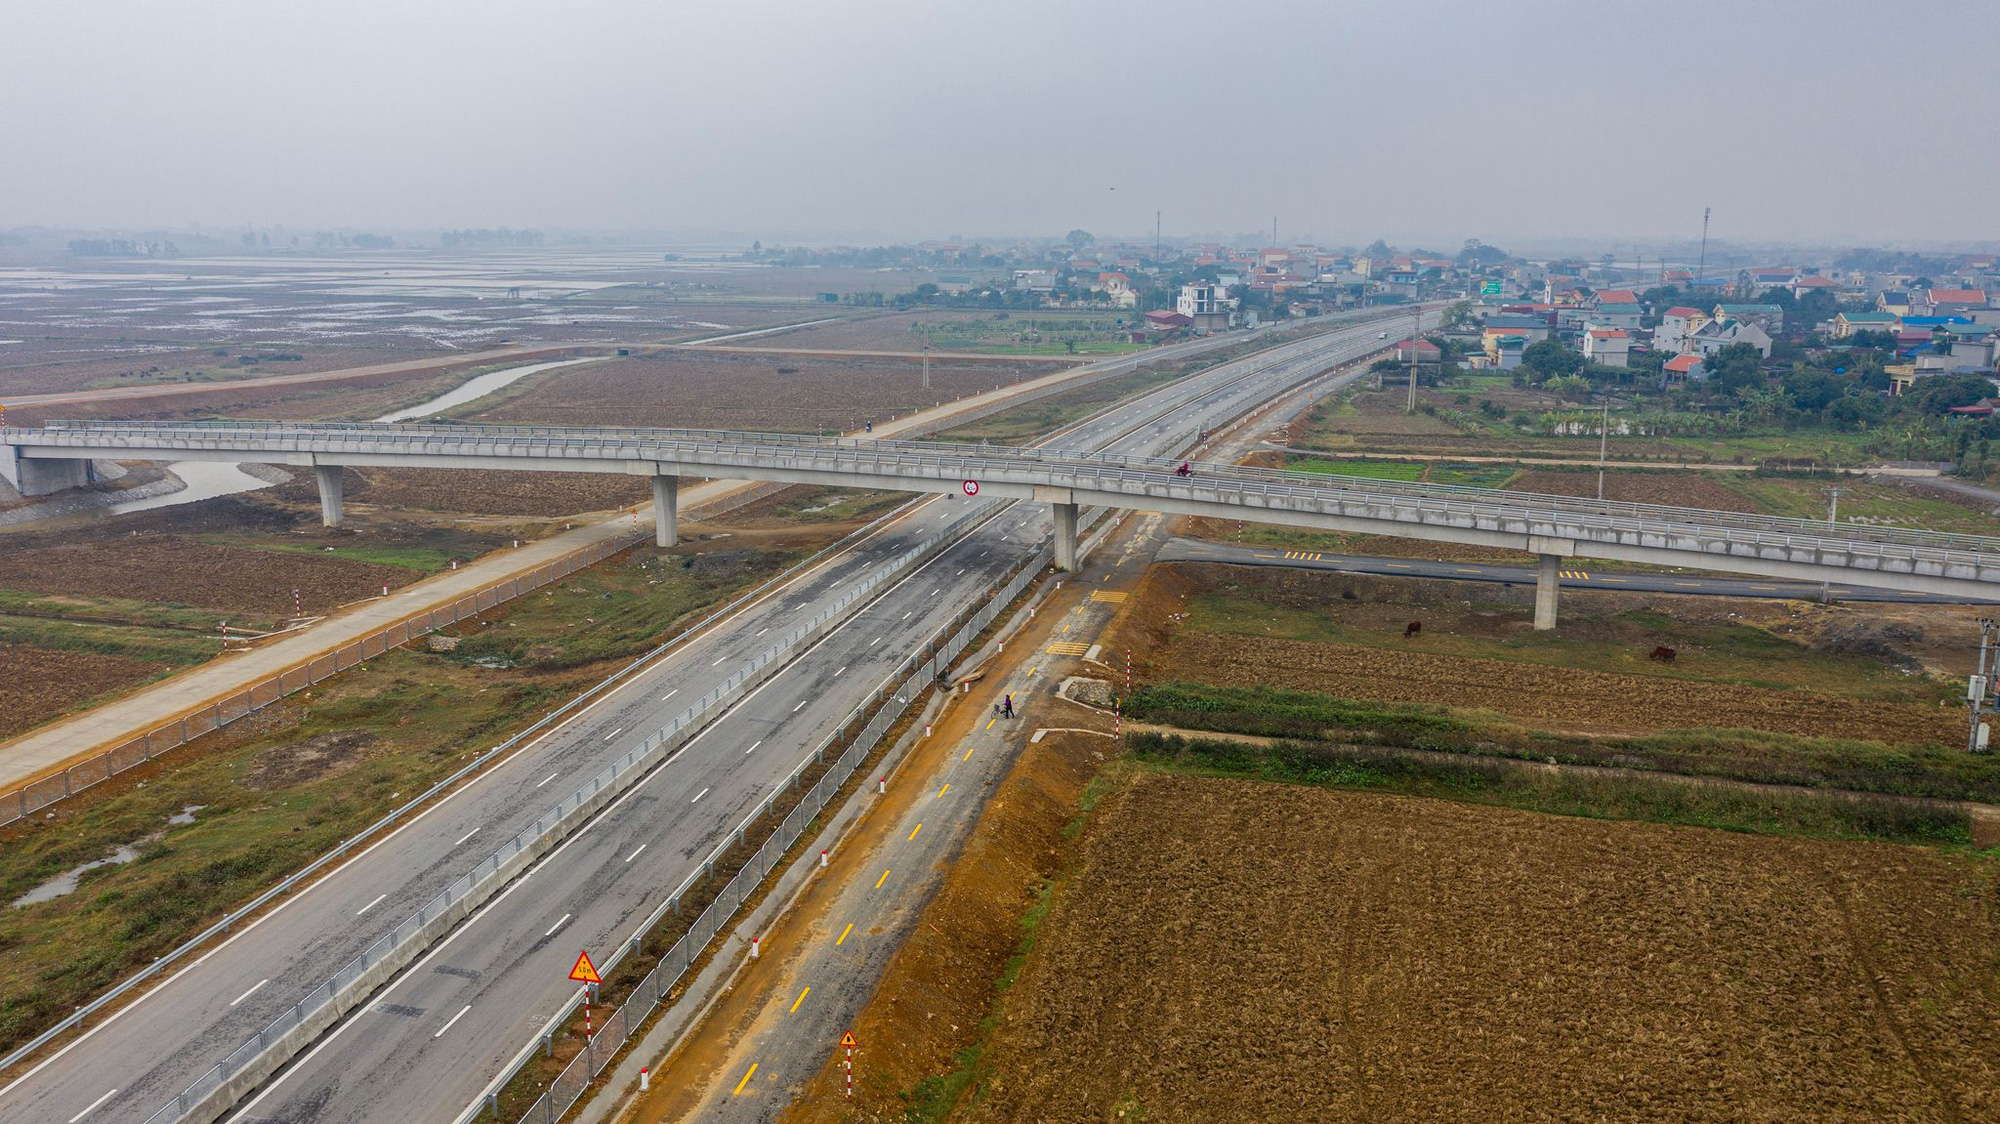 The North - South Expressway will complete the operation of 361 km in 2022 - Photo 2.